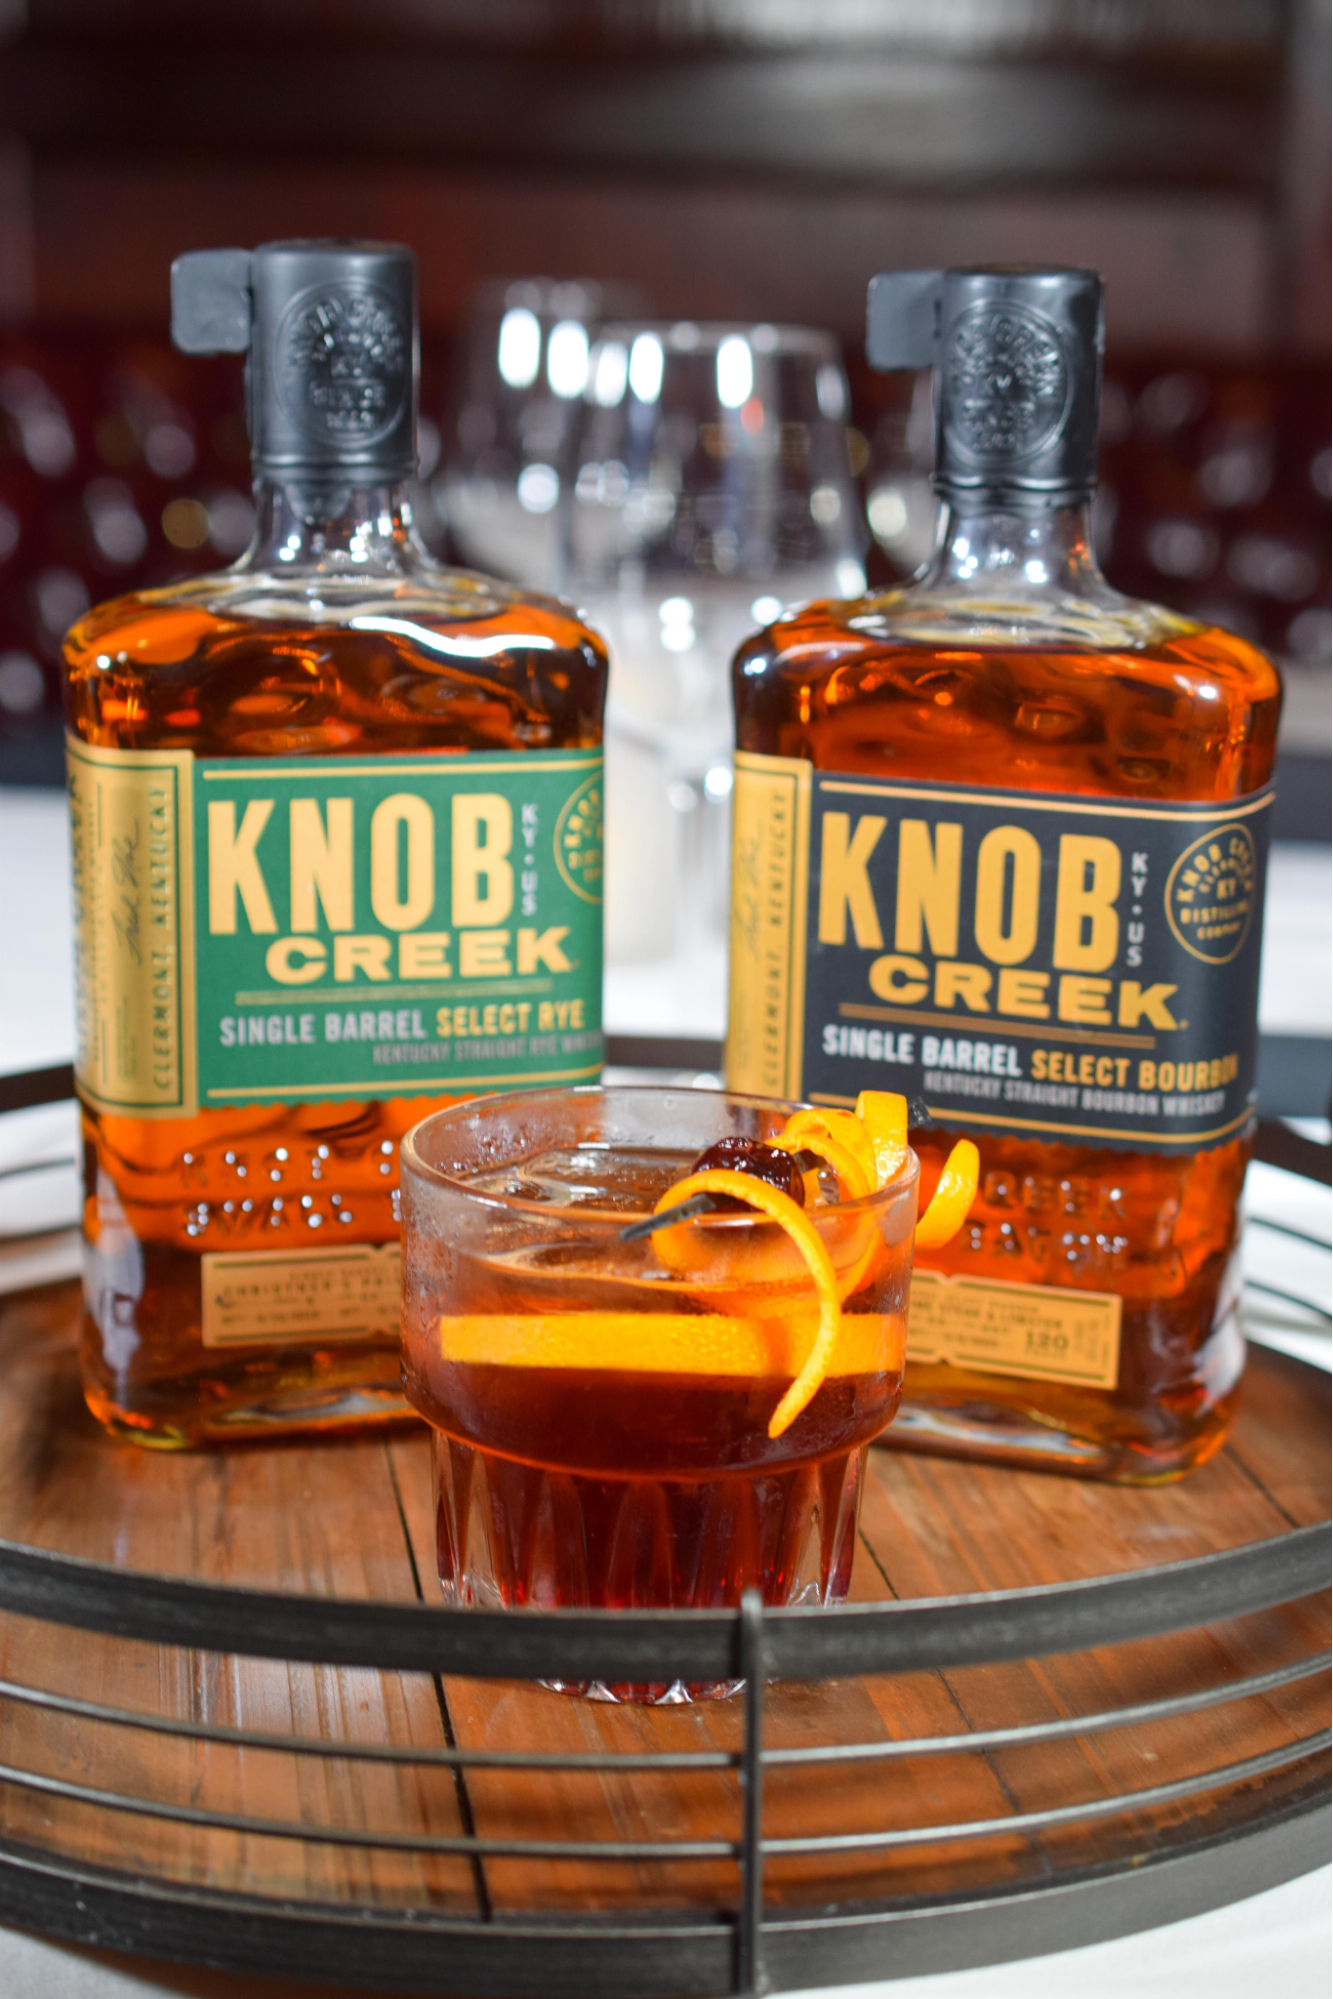 Knob Creek whiskey prepared in a glass with a cherry and orange peel. Two bottles of Knob Creek whiskey behind the glass.